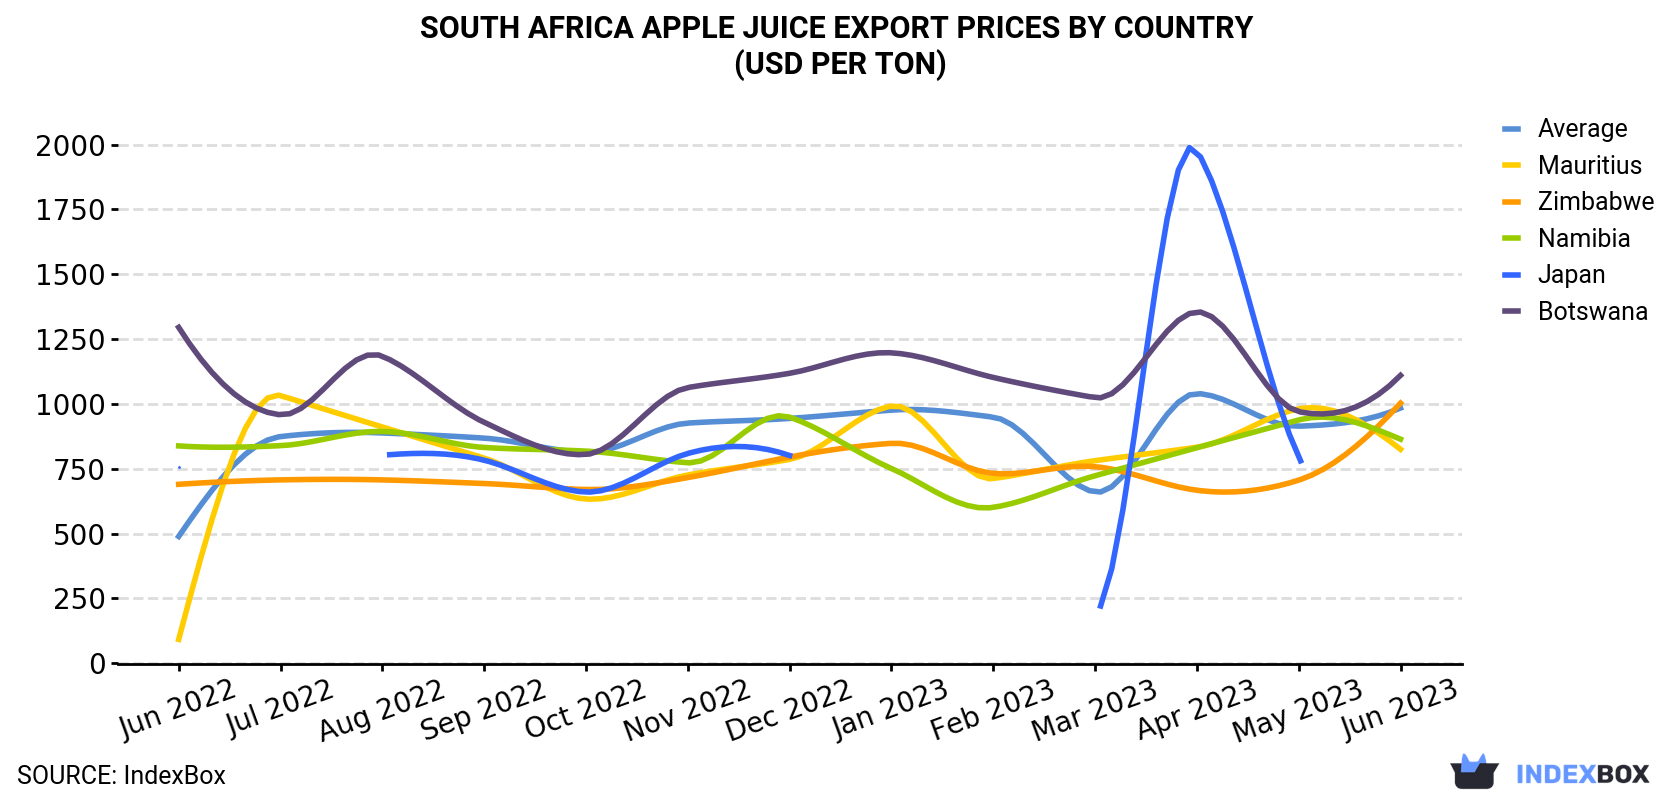 South Africa Apple Juice Export Prices By Country (USD Per Ton)